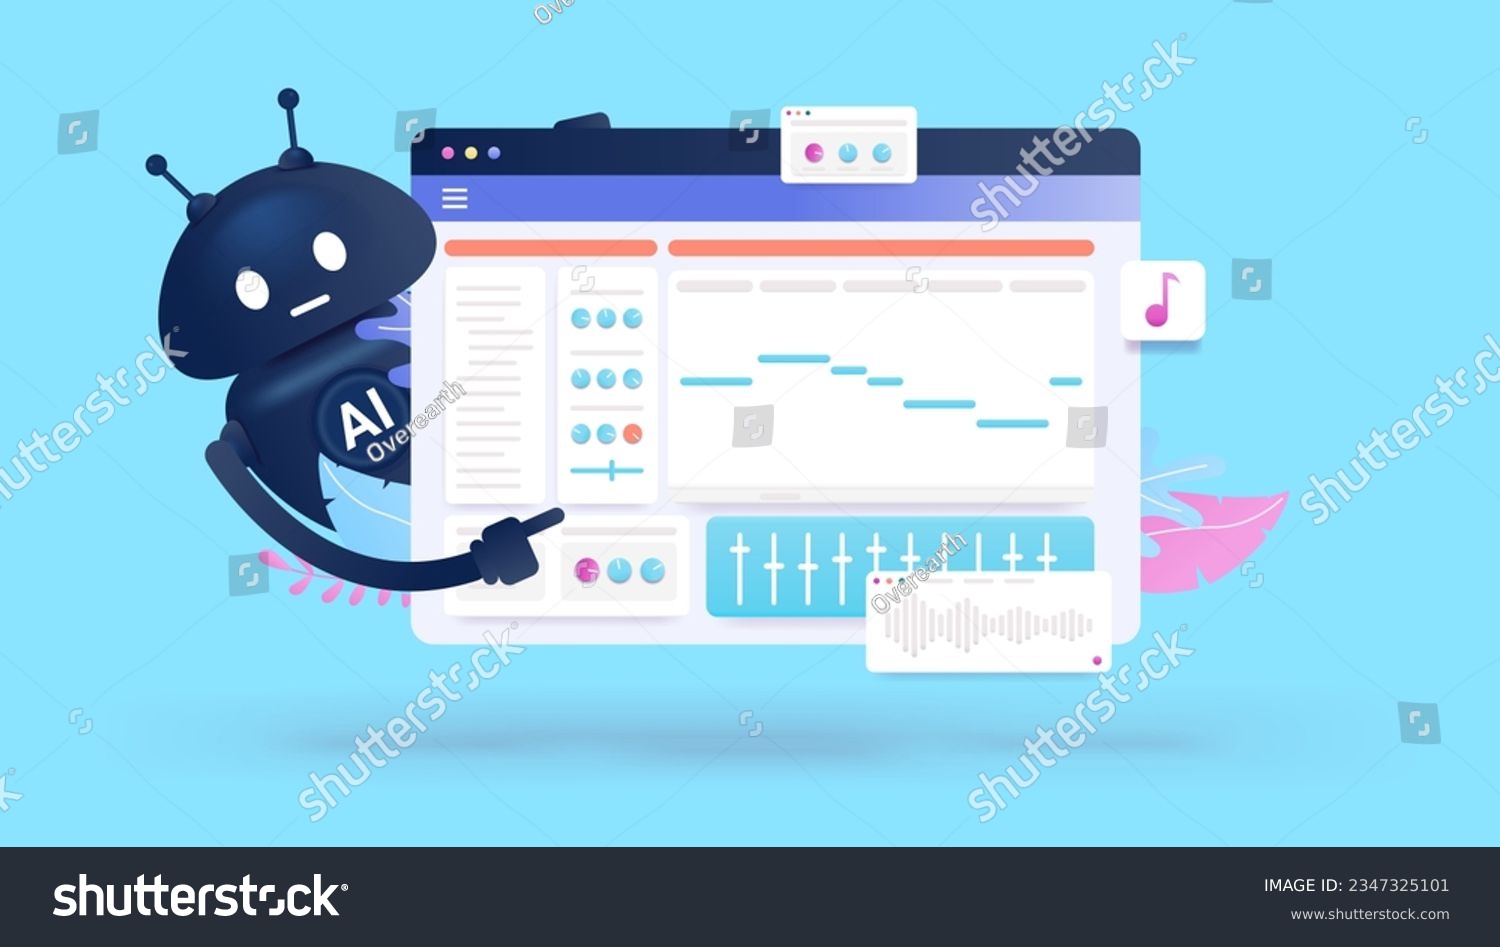 SVG of AI music - Vector illustration of artificial intelligence robot making music on computer with midi software on screen svg